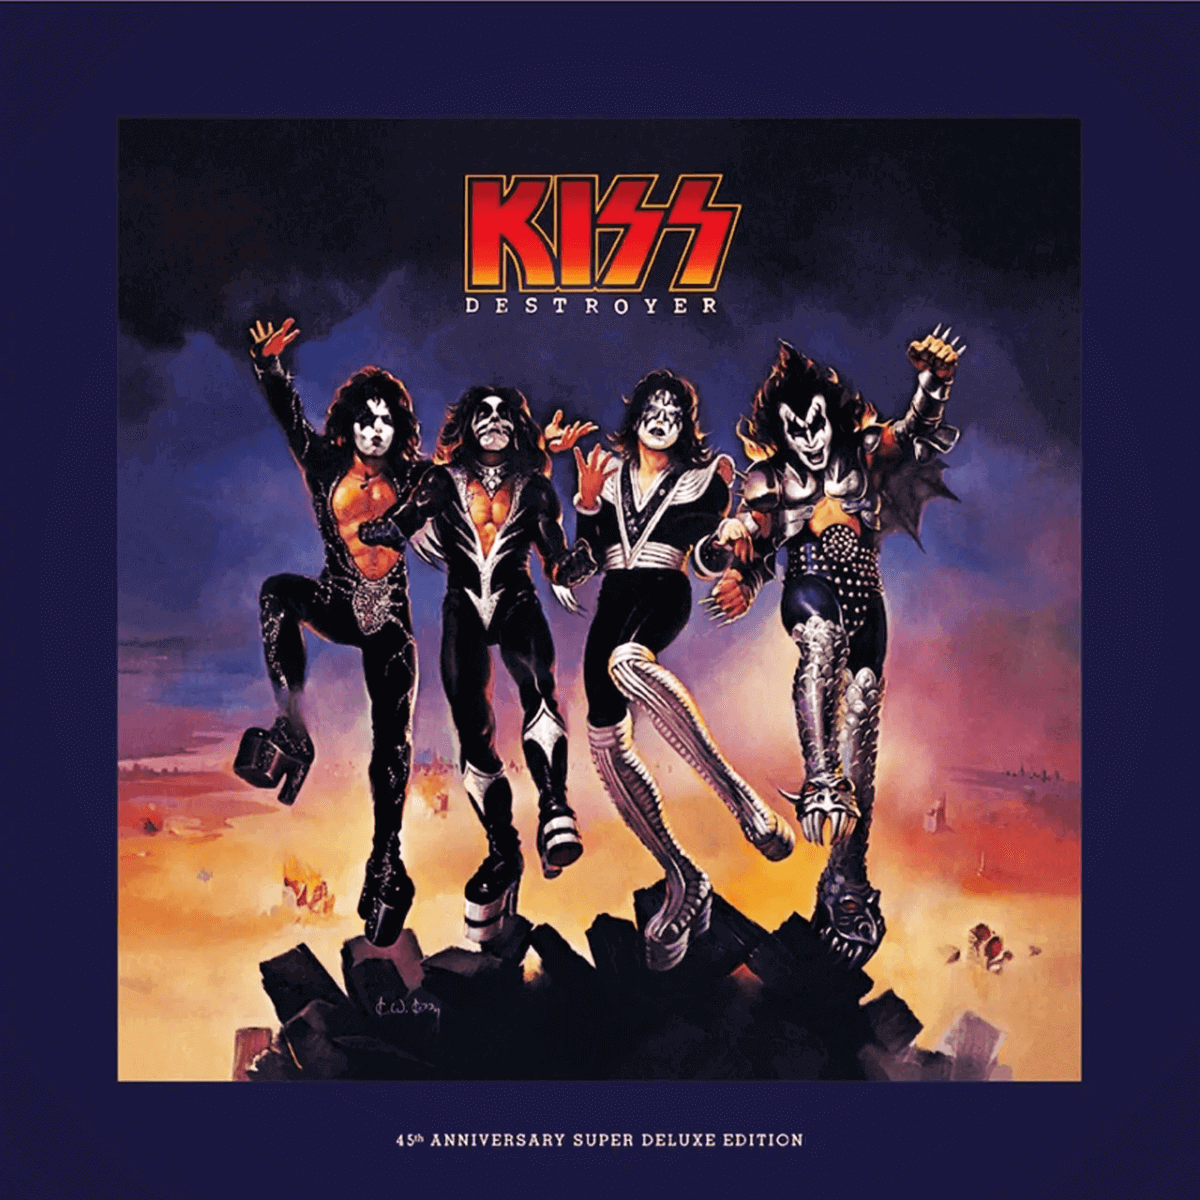 KISS - Destroyer 45th Anniversary Super Deluxe Edition